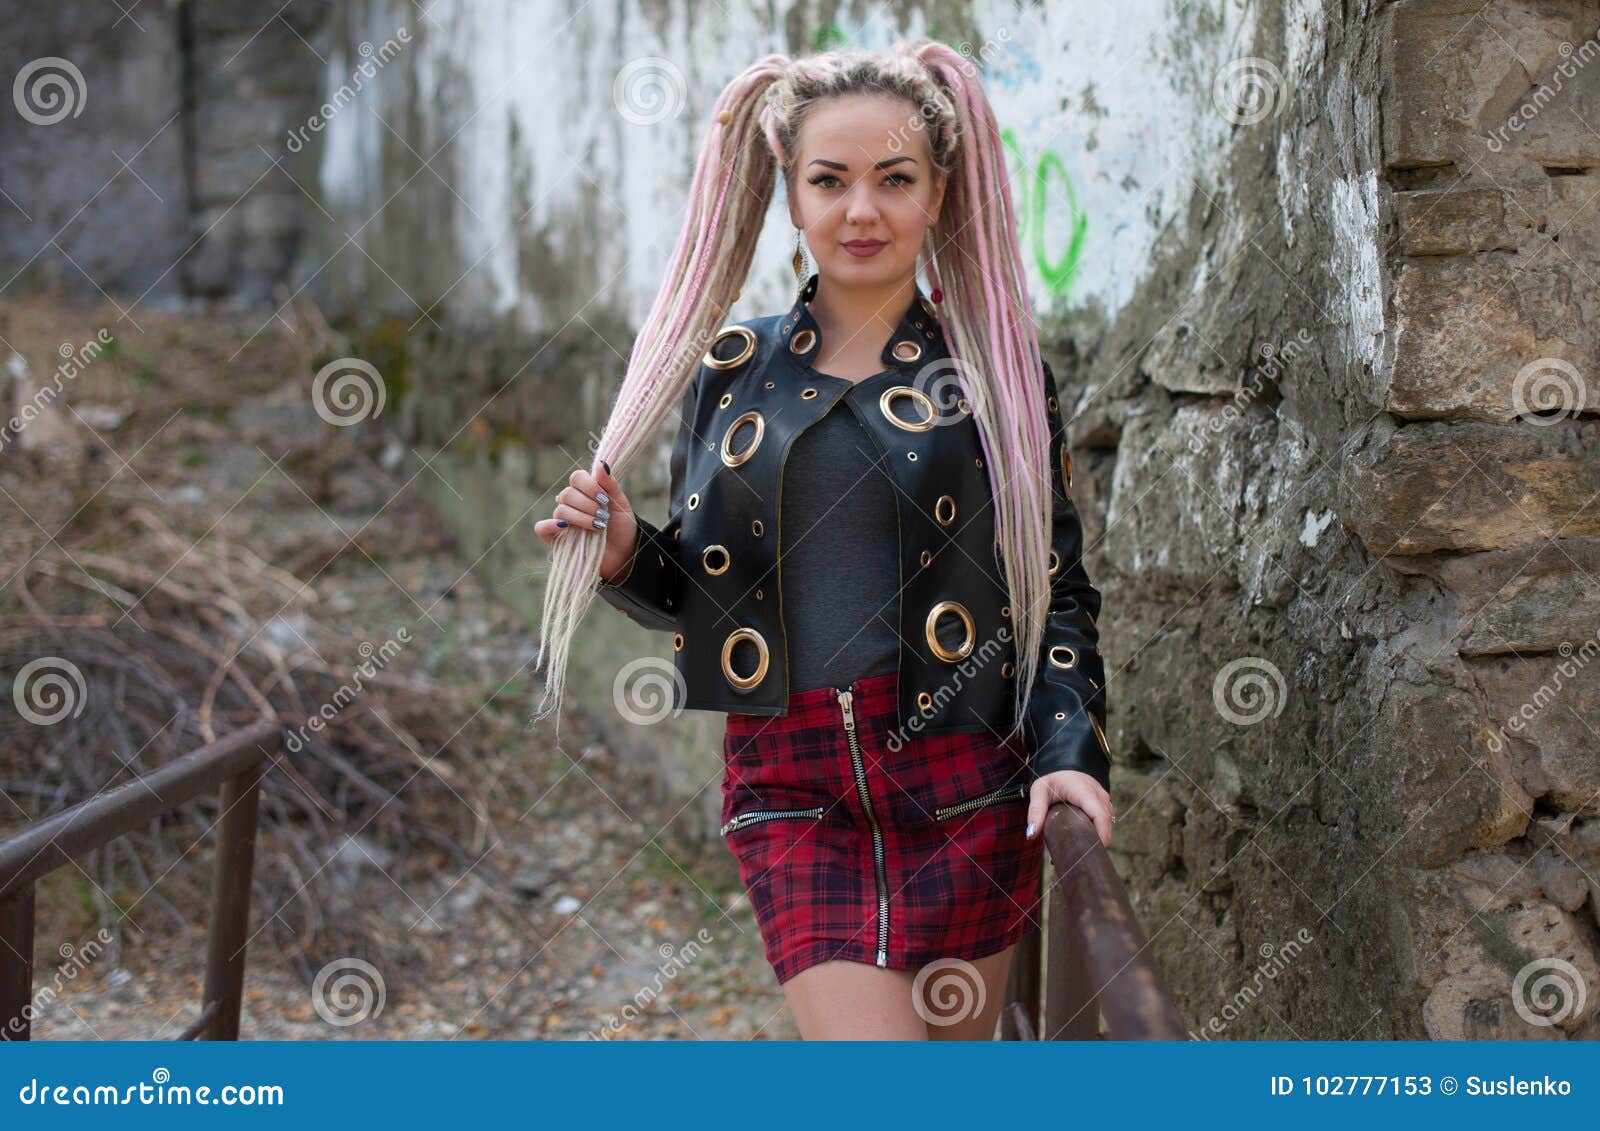 A Girl With Dreadlocks In A Leather Jacket And A Short Skirt